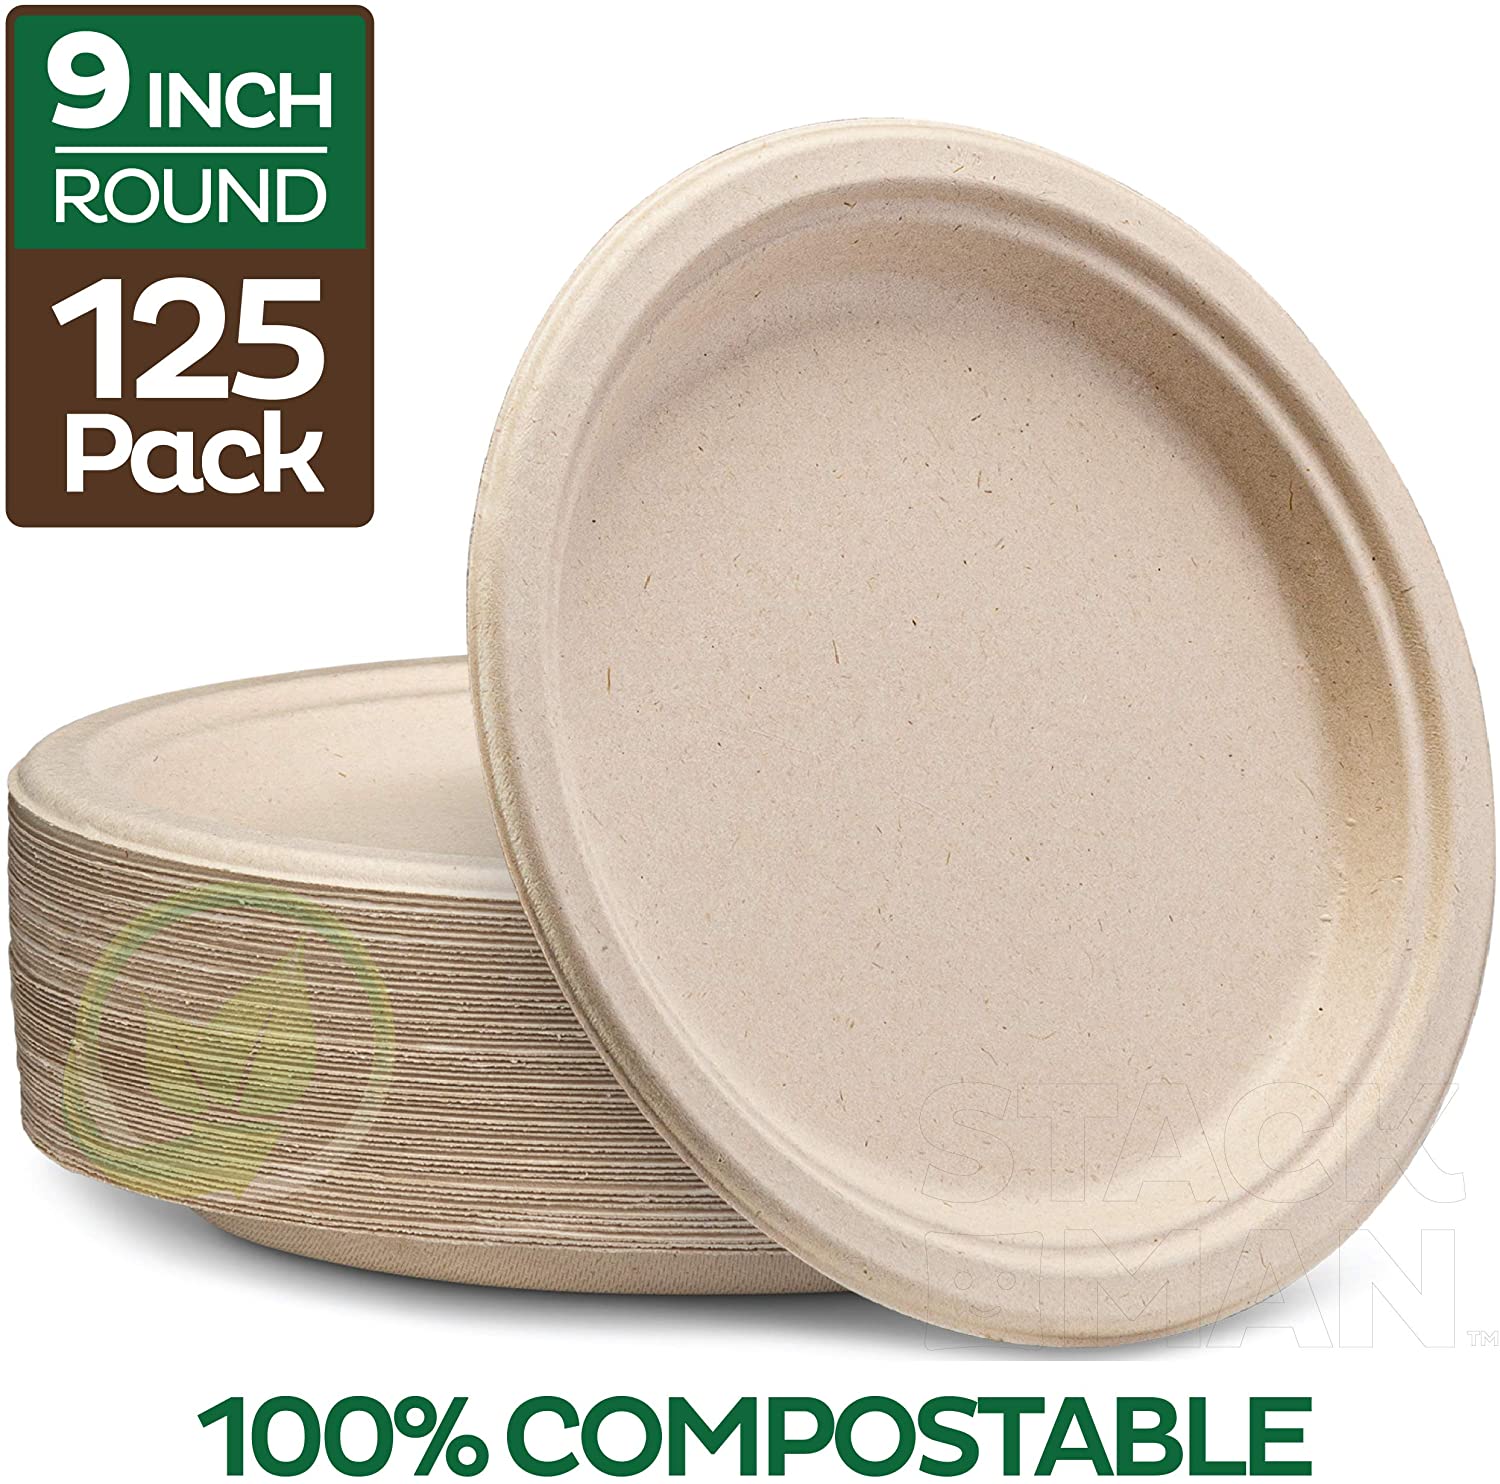 Amozife 7 inch Bagasse Paper Plates, 125 Count Heavy Duty Eco-Friendly Disposable Compostable Brown Paper Plates for Everyday Supply